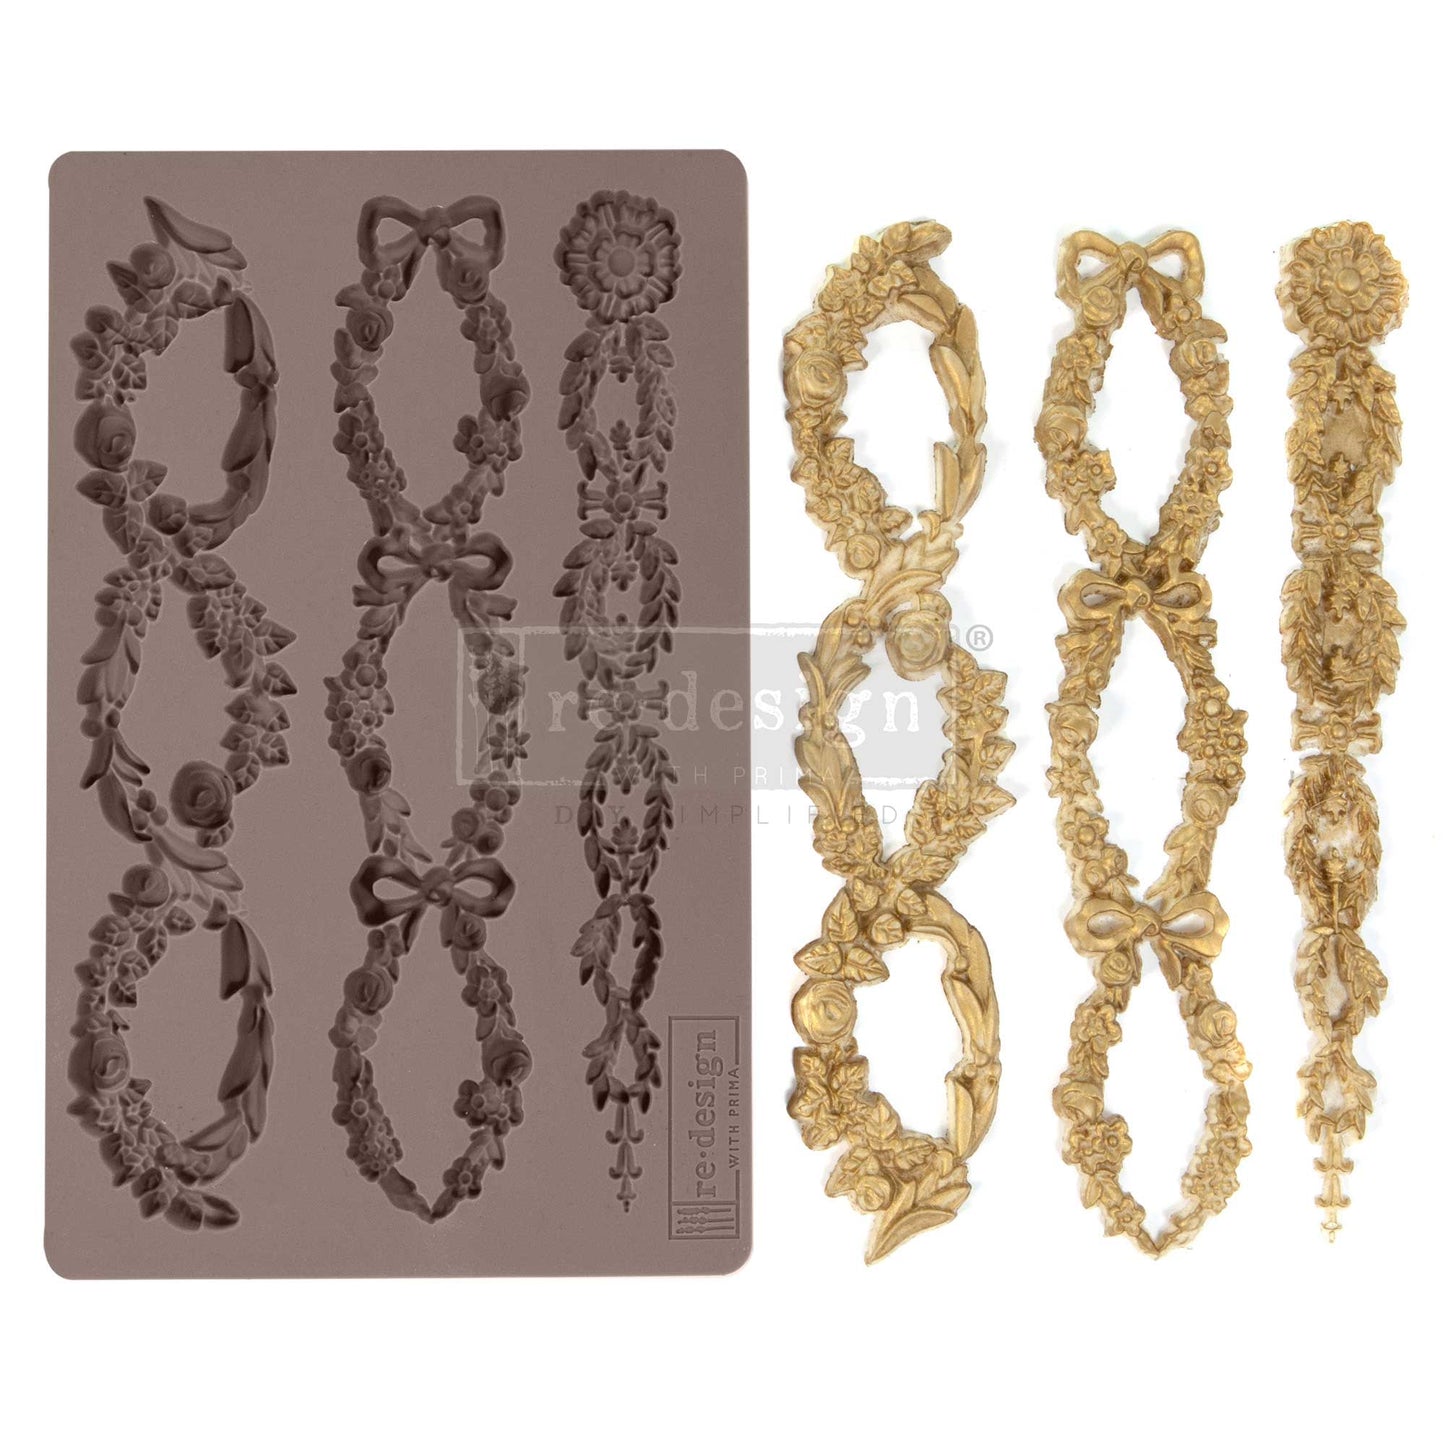 Floral Chain 5"x8" Crafting Diy Projects Funiture 655350636418